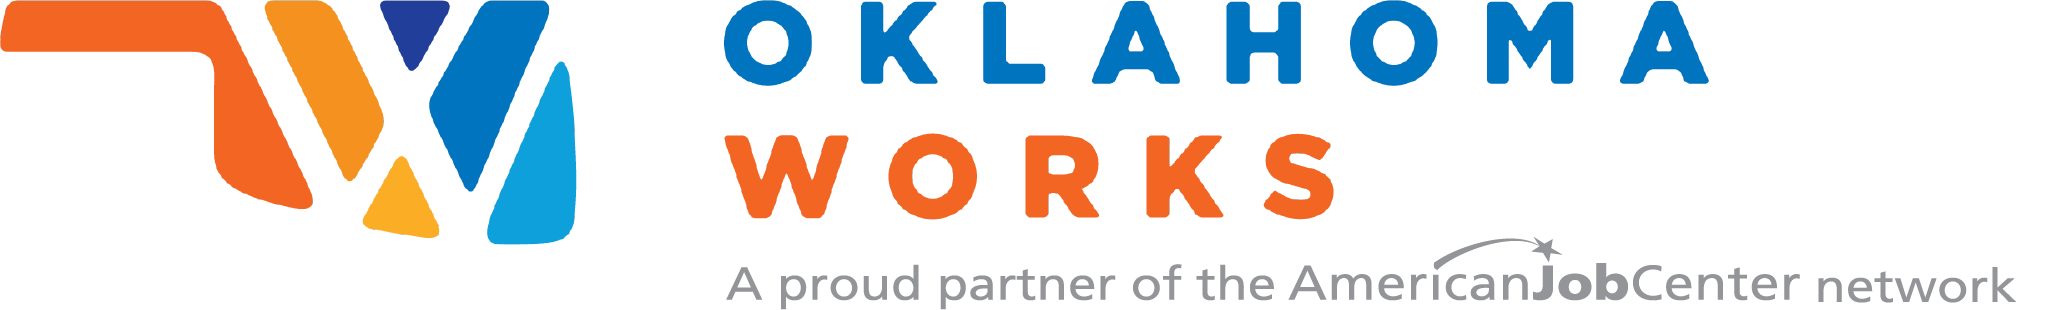 Oklahoma Works - A Proud Partner of the American Job Center Network